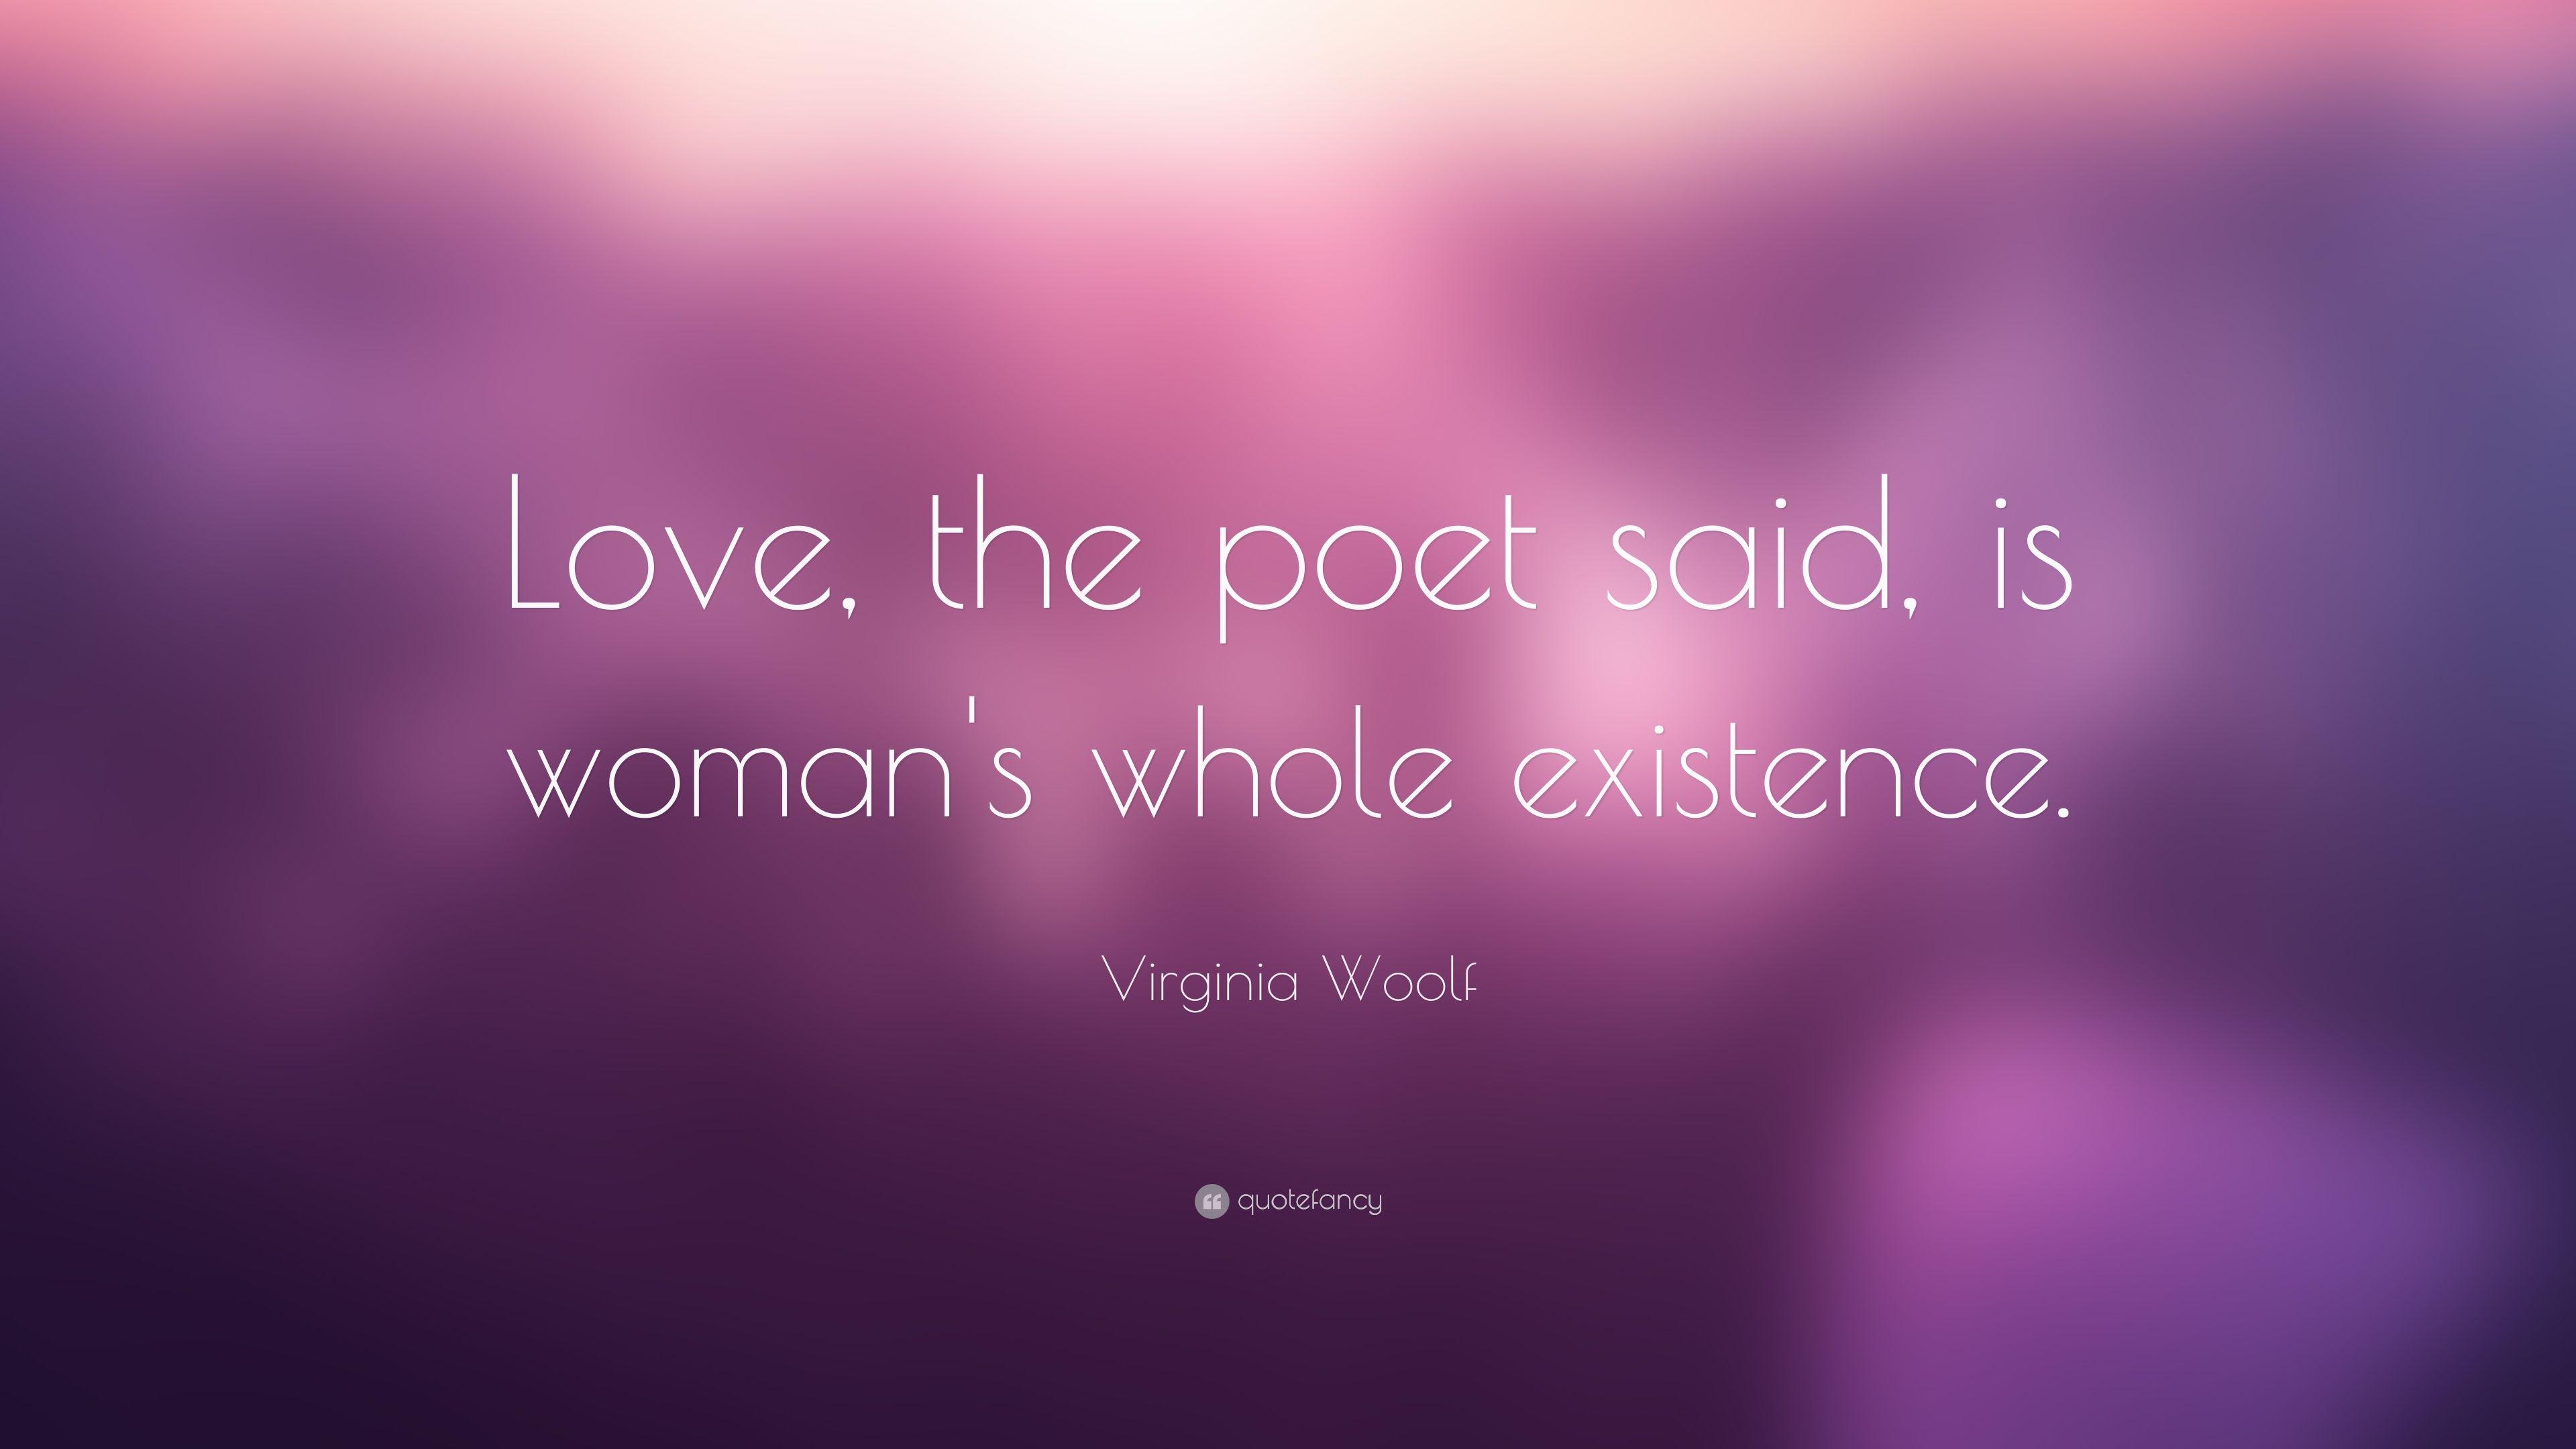 Virginia Woolf Quote: “Love, the poet said, is woman's whole